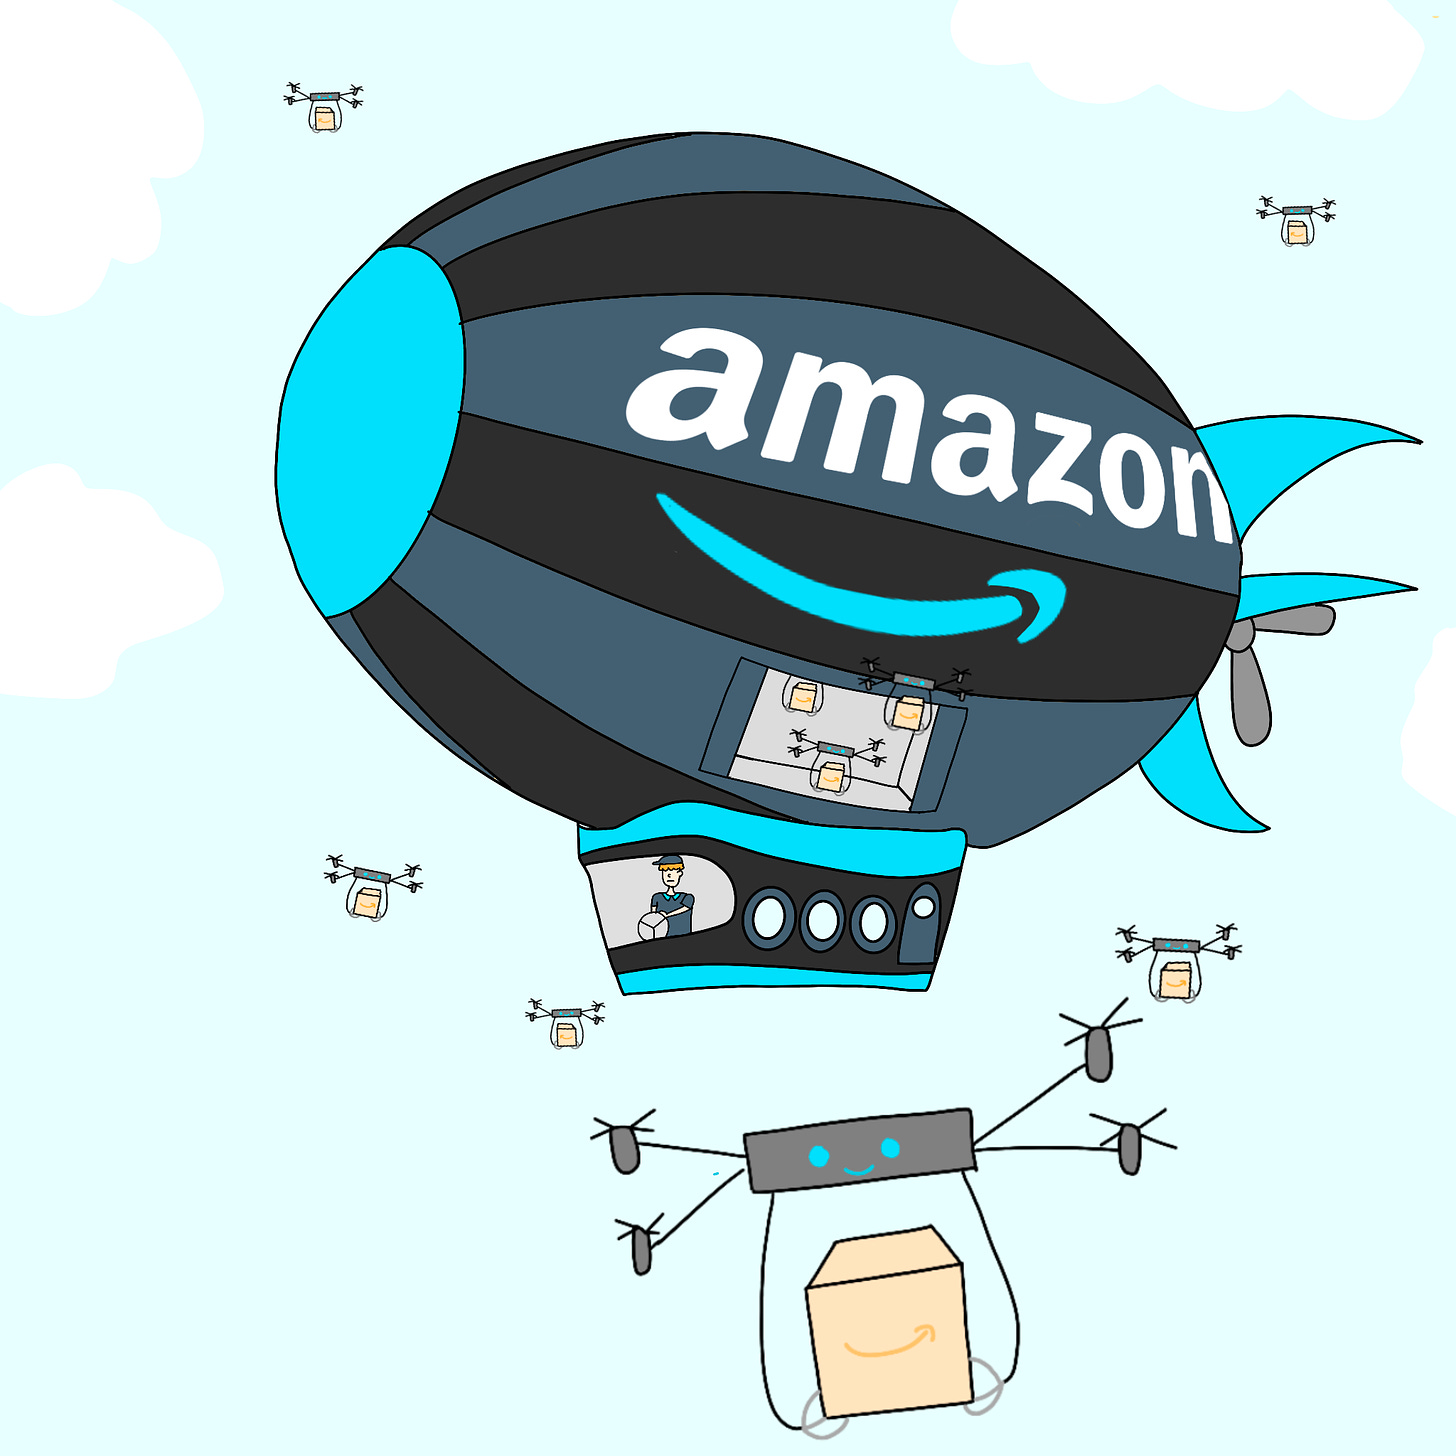 Panel 4: A flying Amazon warehouse and drones carrying packages are shown in the sky.